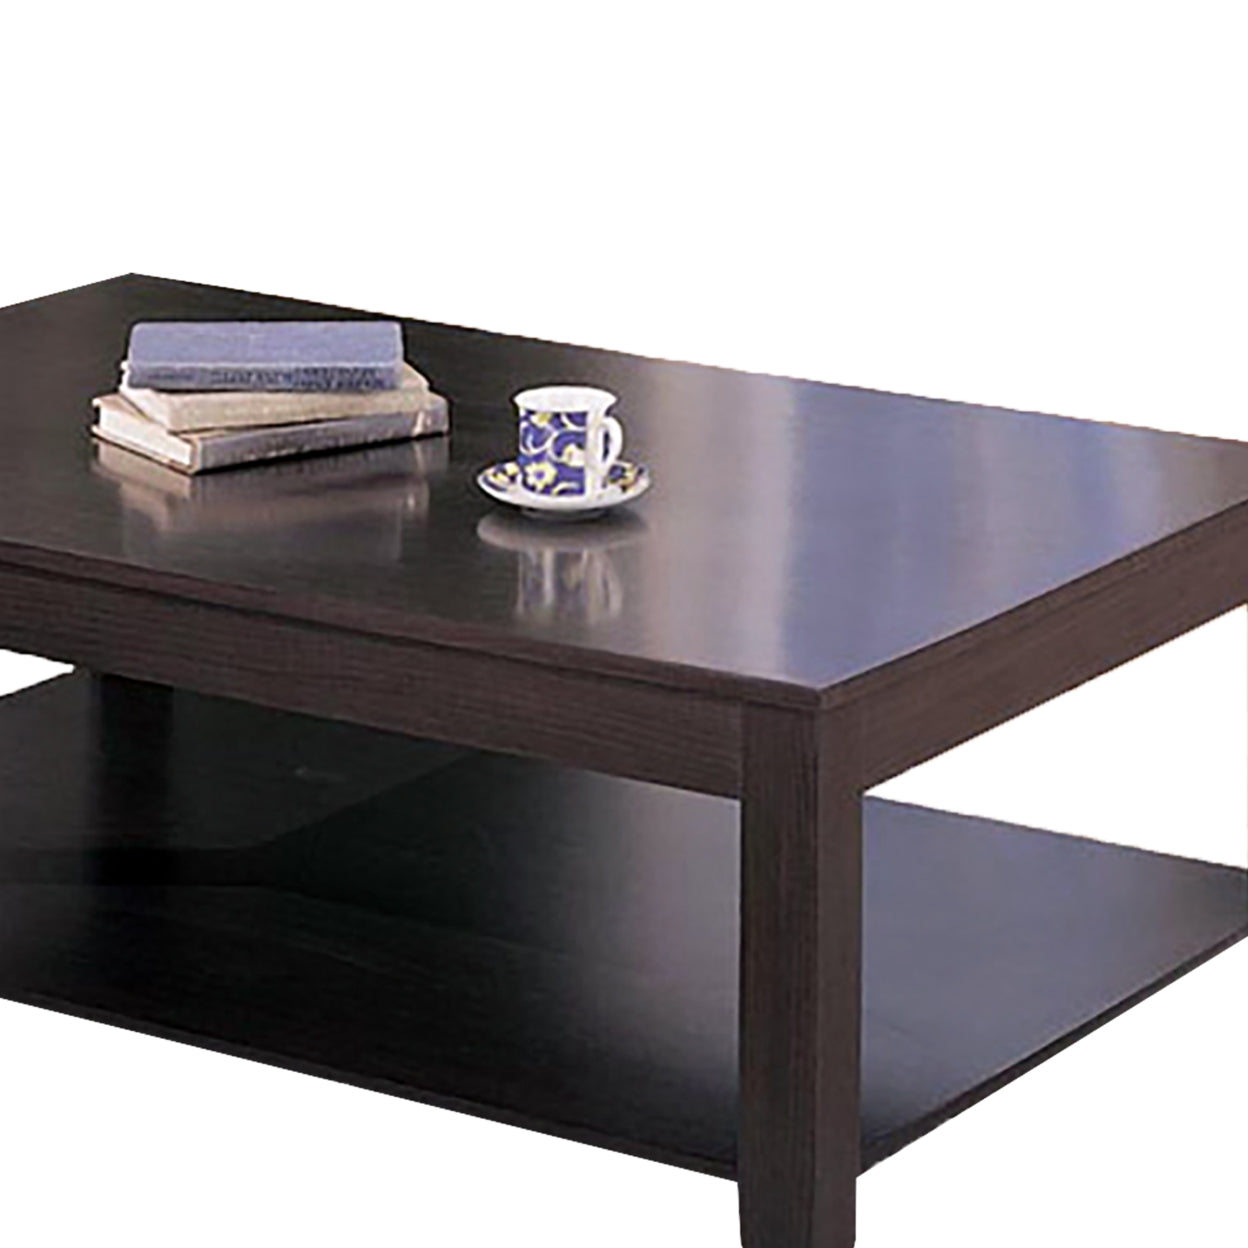 Stewart 3-piece Occasional Table Set with Lower Shelf Cappuccino